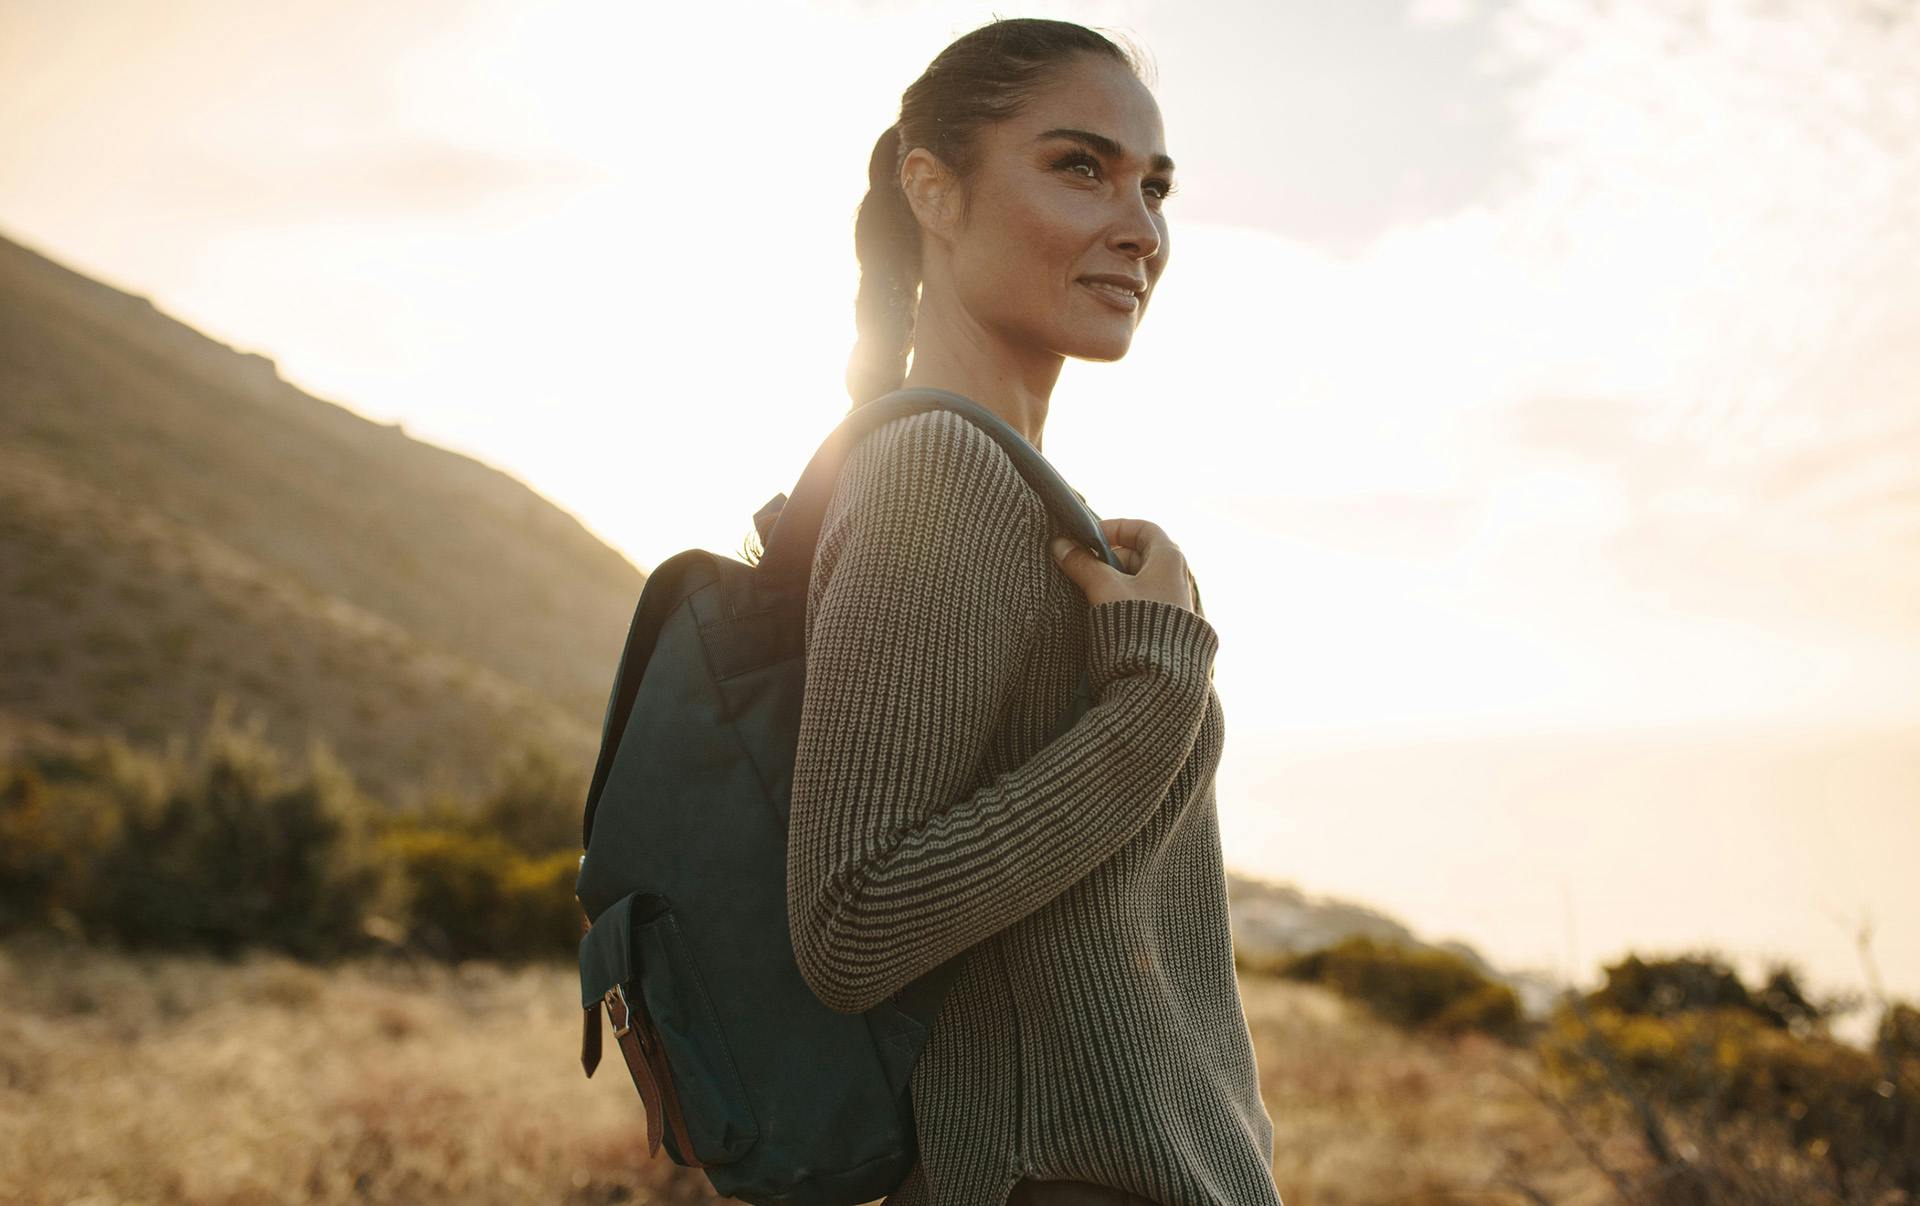 Woman wearing backpack outdoors.